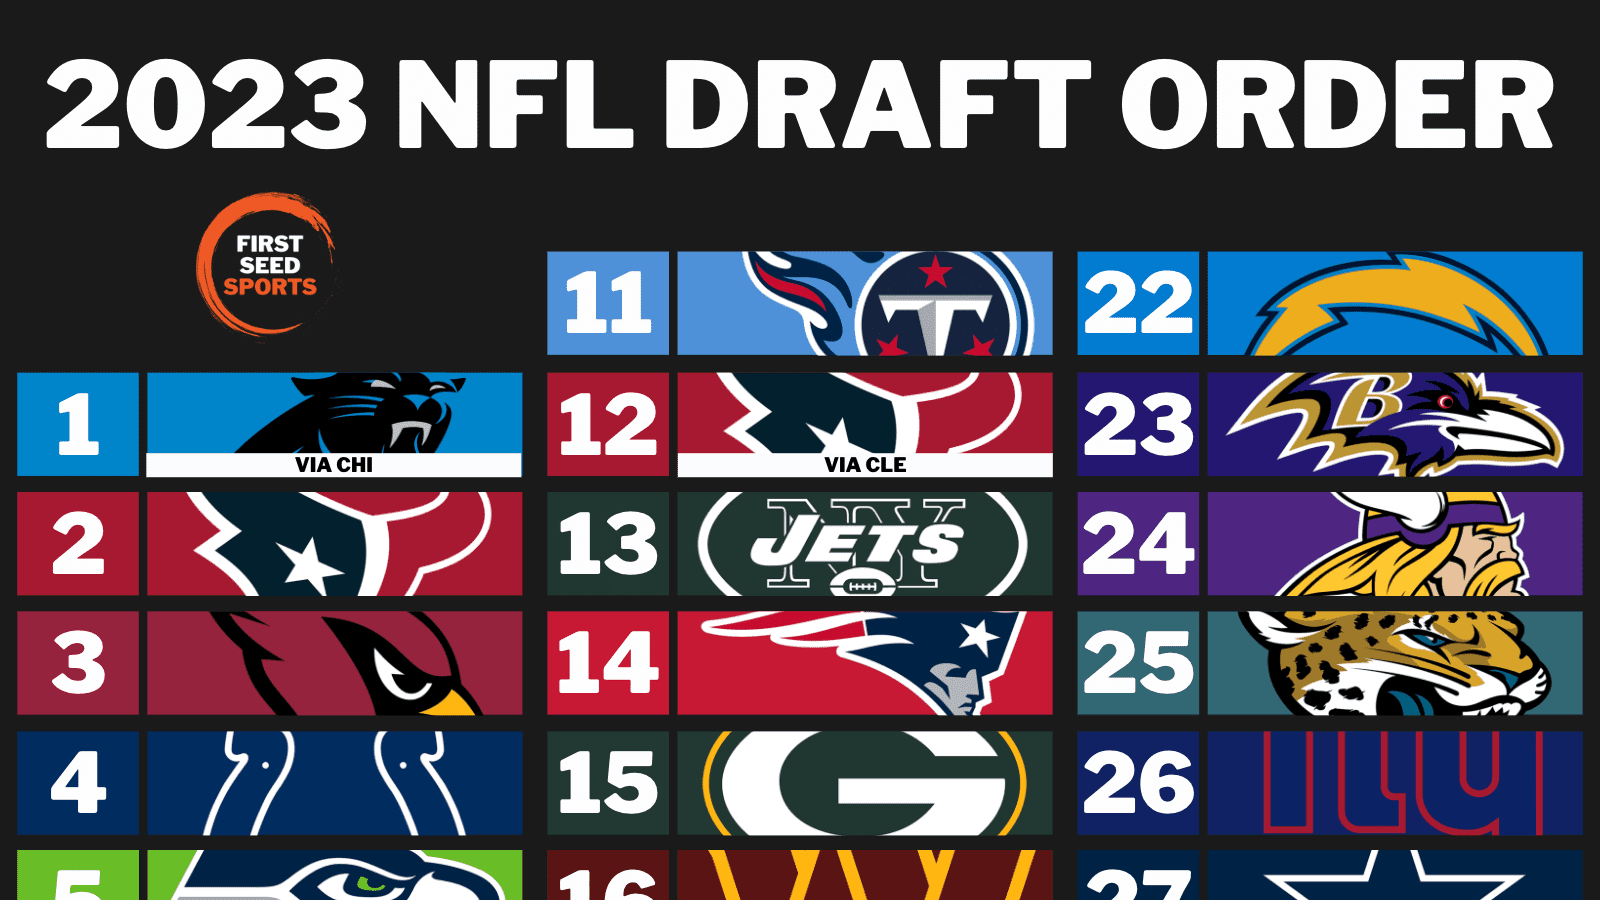 2023 NFL Draft Order - First Seed Sports